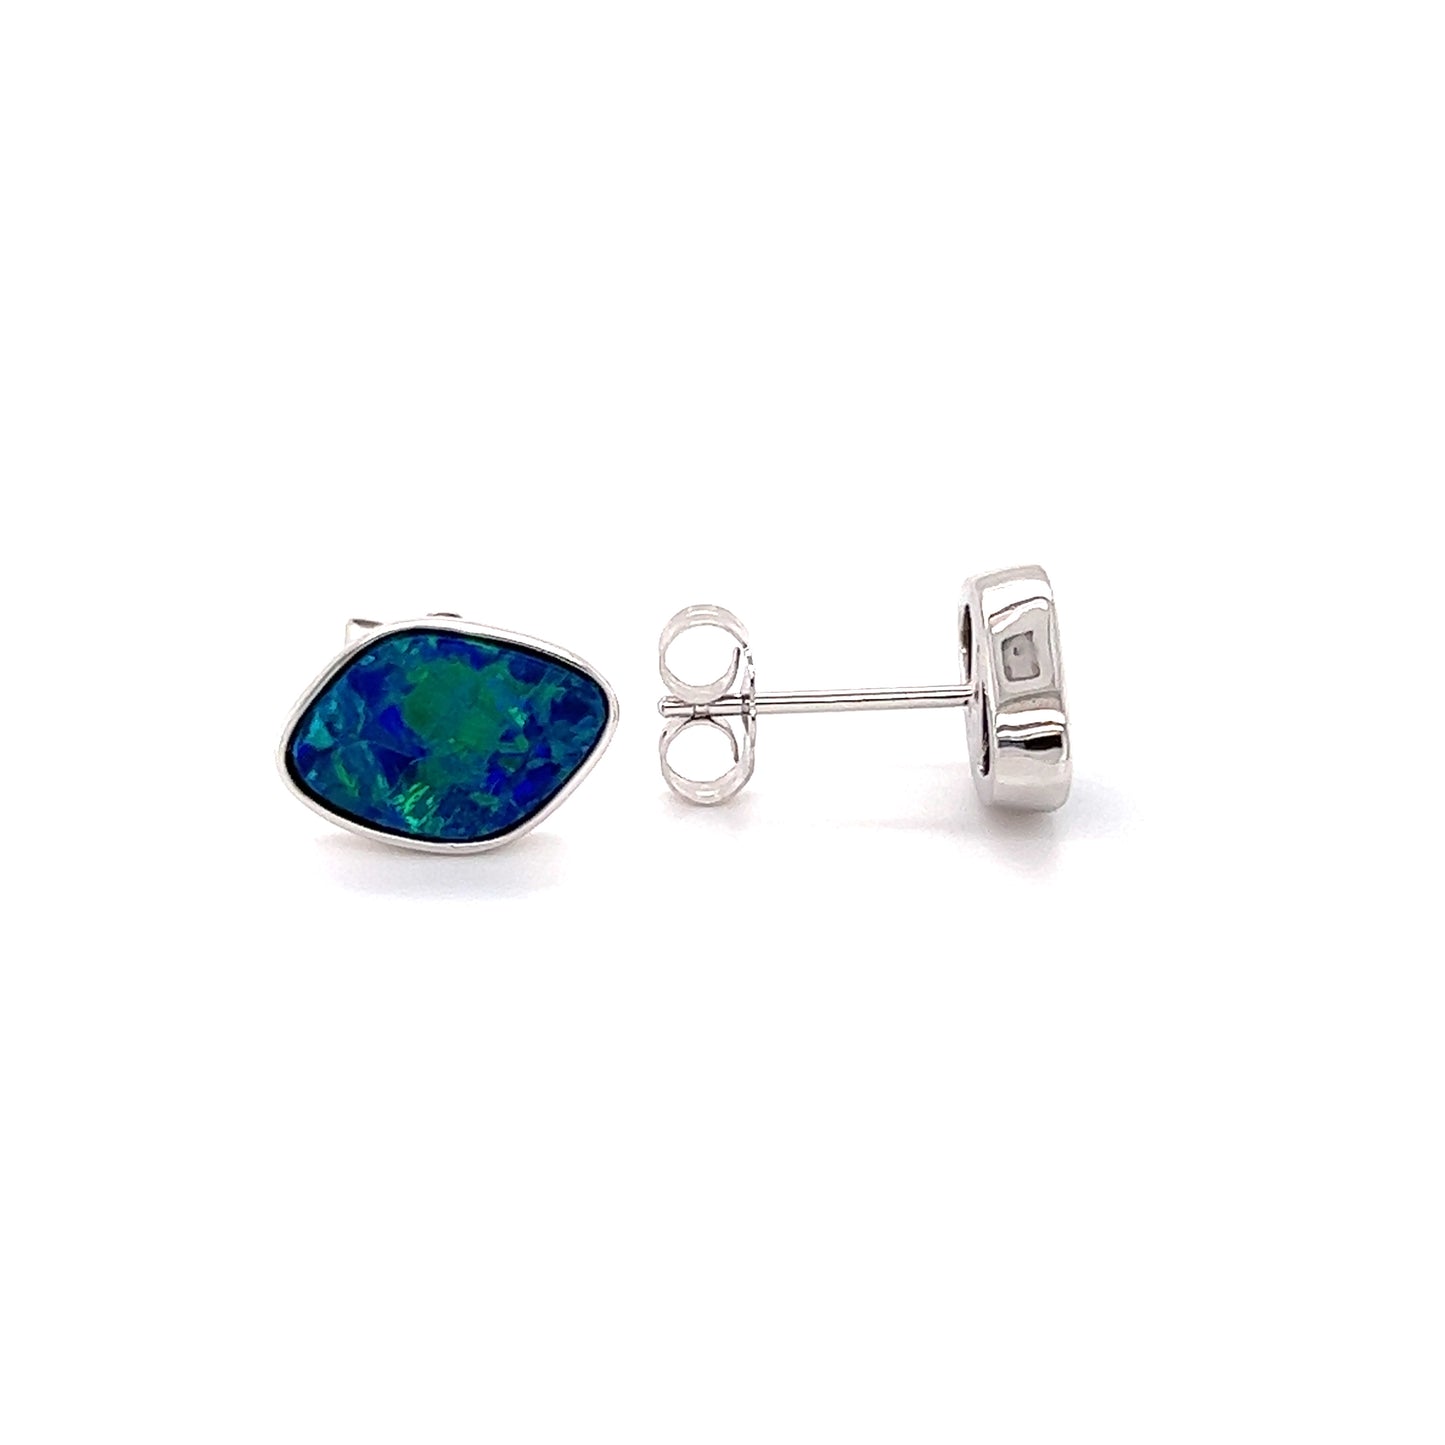 Black Opal Stud Earrings with 2.79ctw of Opal in 14K White Gold Front and Side View